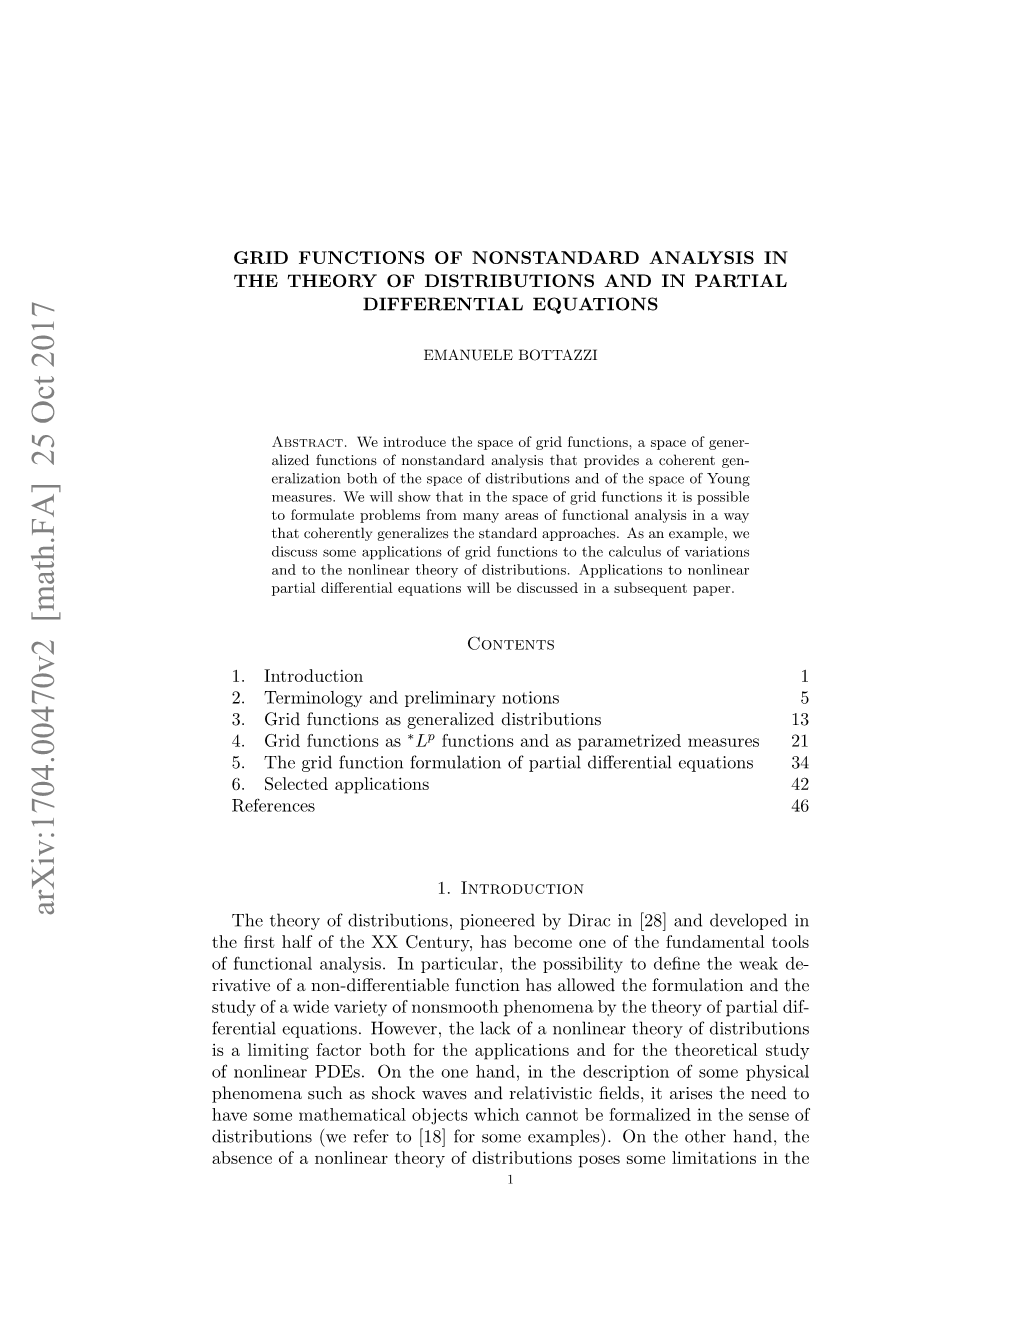 Grid Functions of Nonstandard Analysis in the Theory of Distributions and In